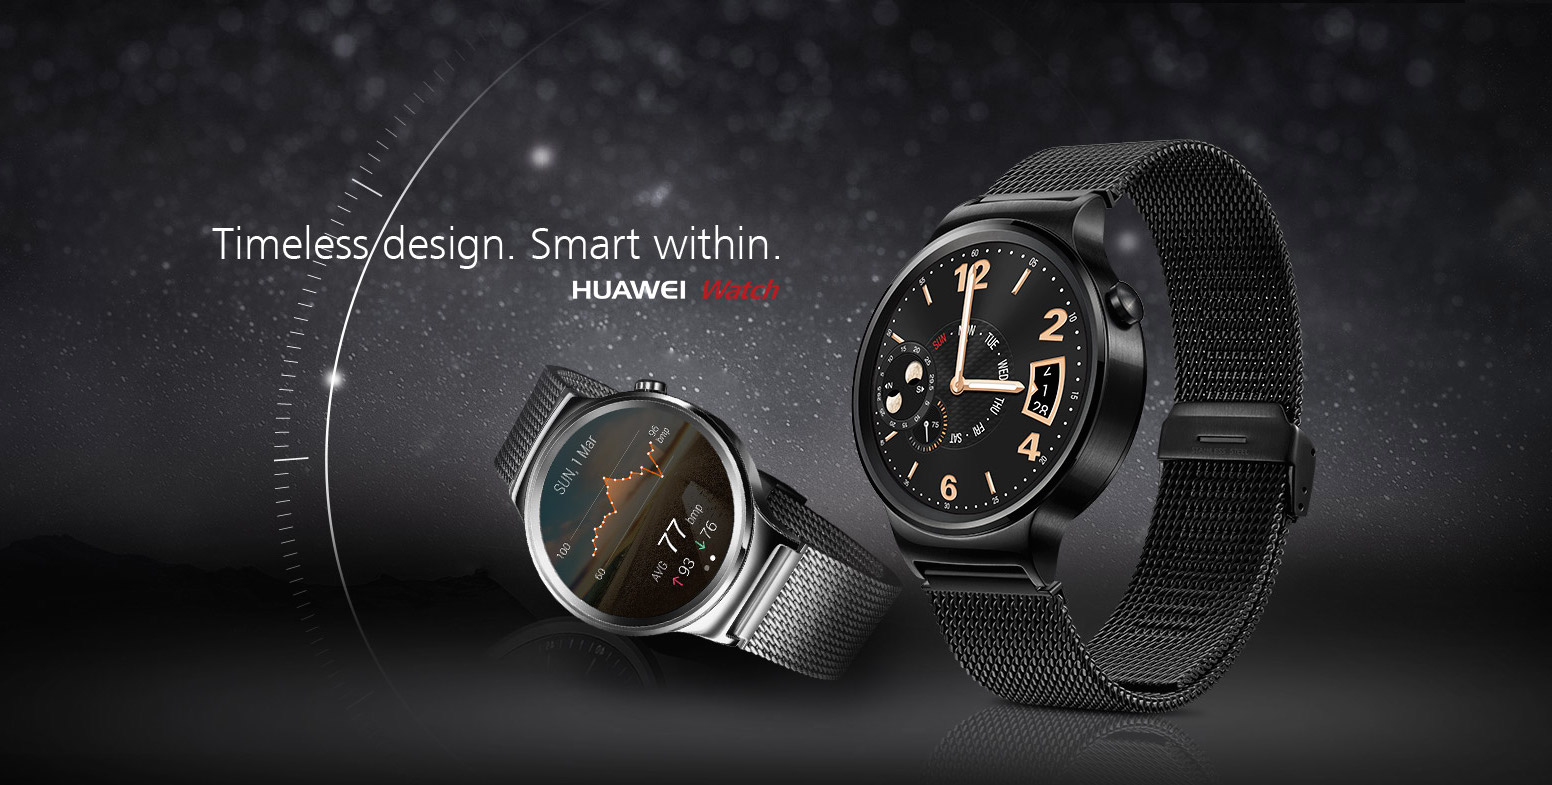 huawei watch - Android Wear